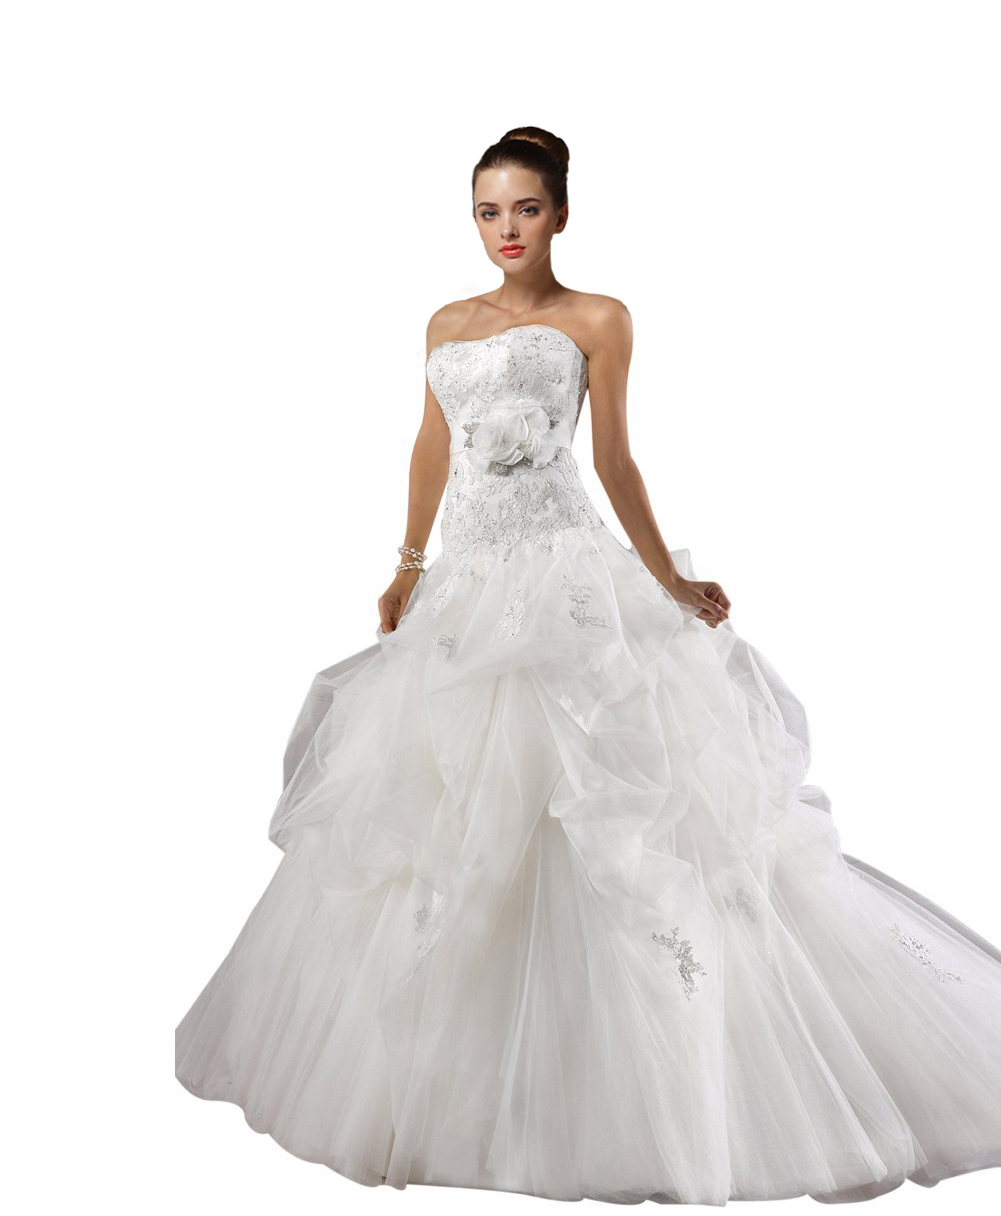 Women's Strapless Lace Upper Bodice With Net Chapel Train Weddin - Click Image to Close